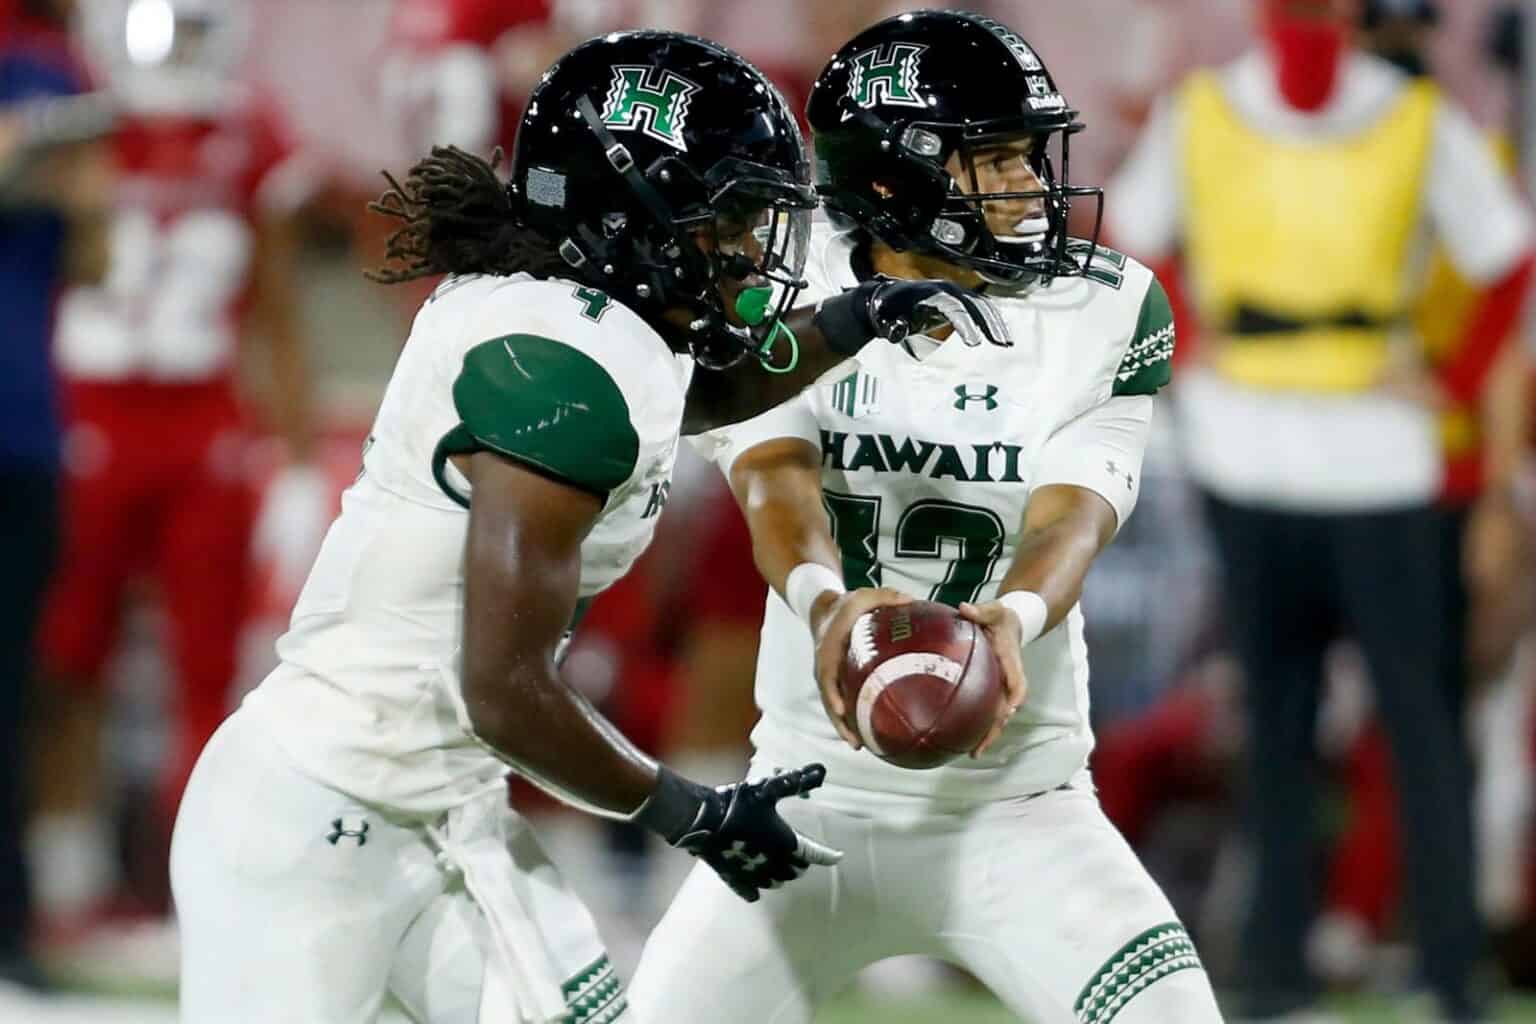 Hawaii announces future football schedule changes, additions